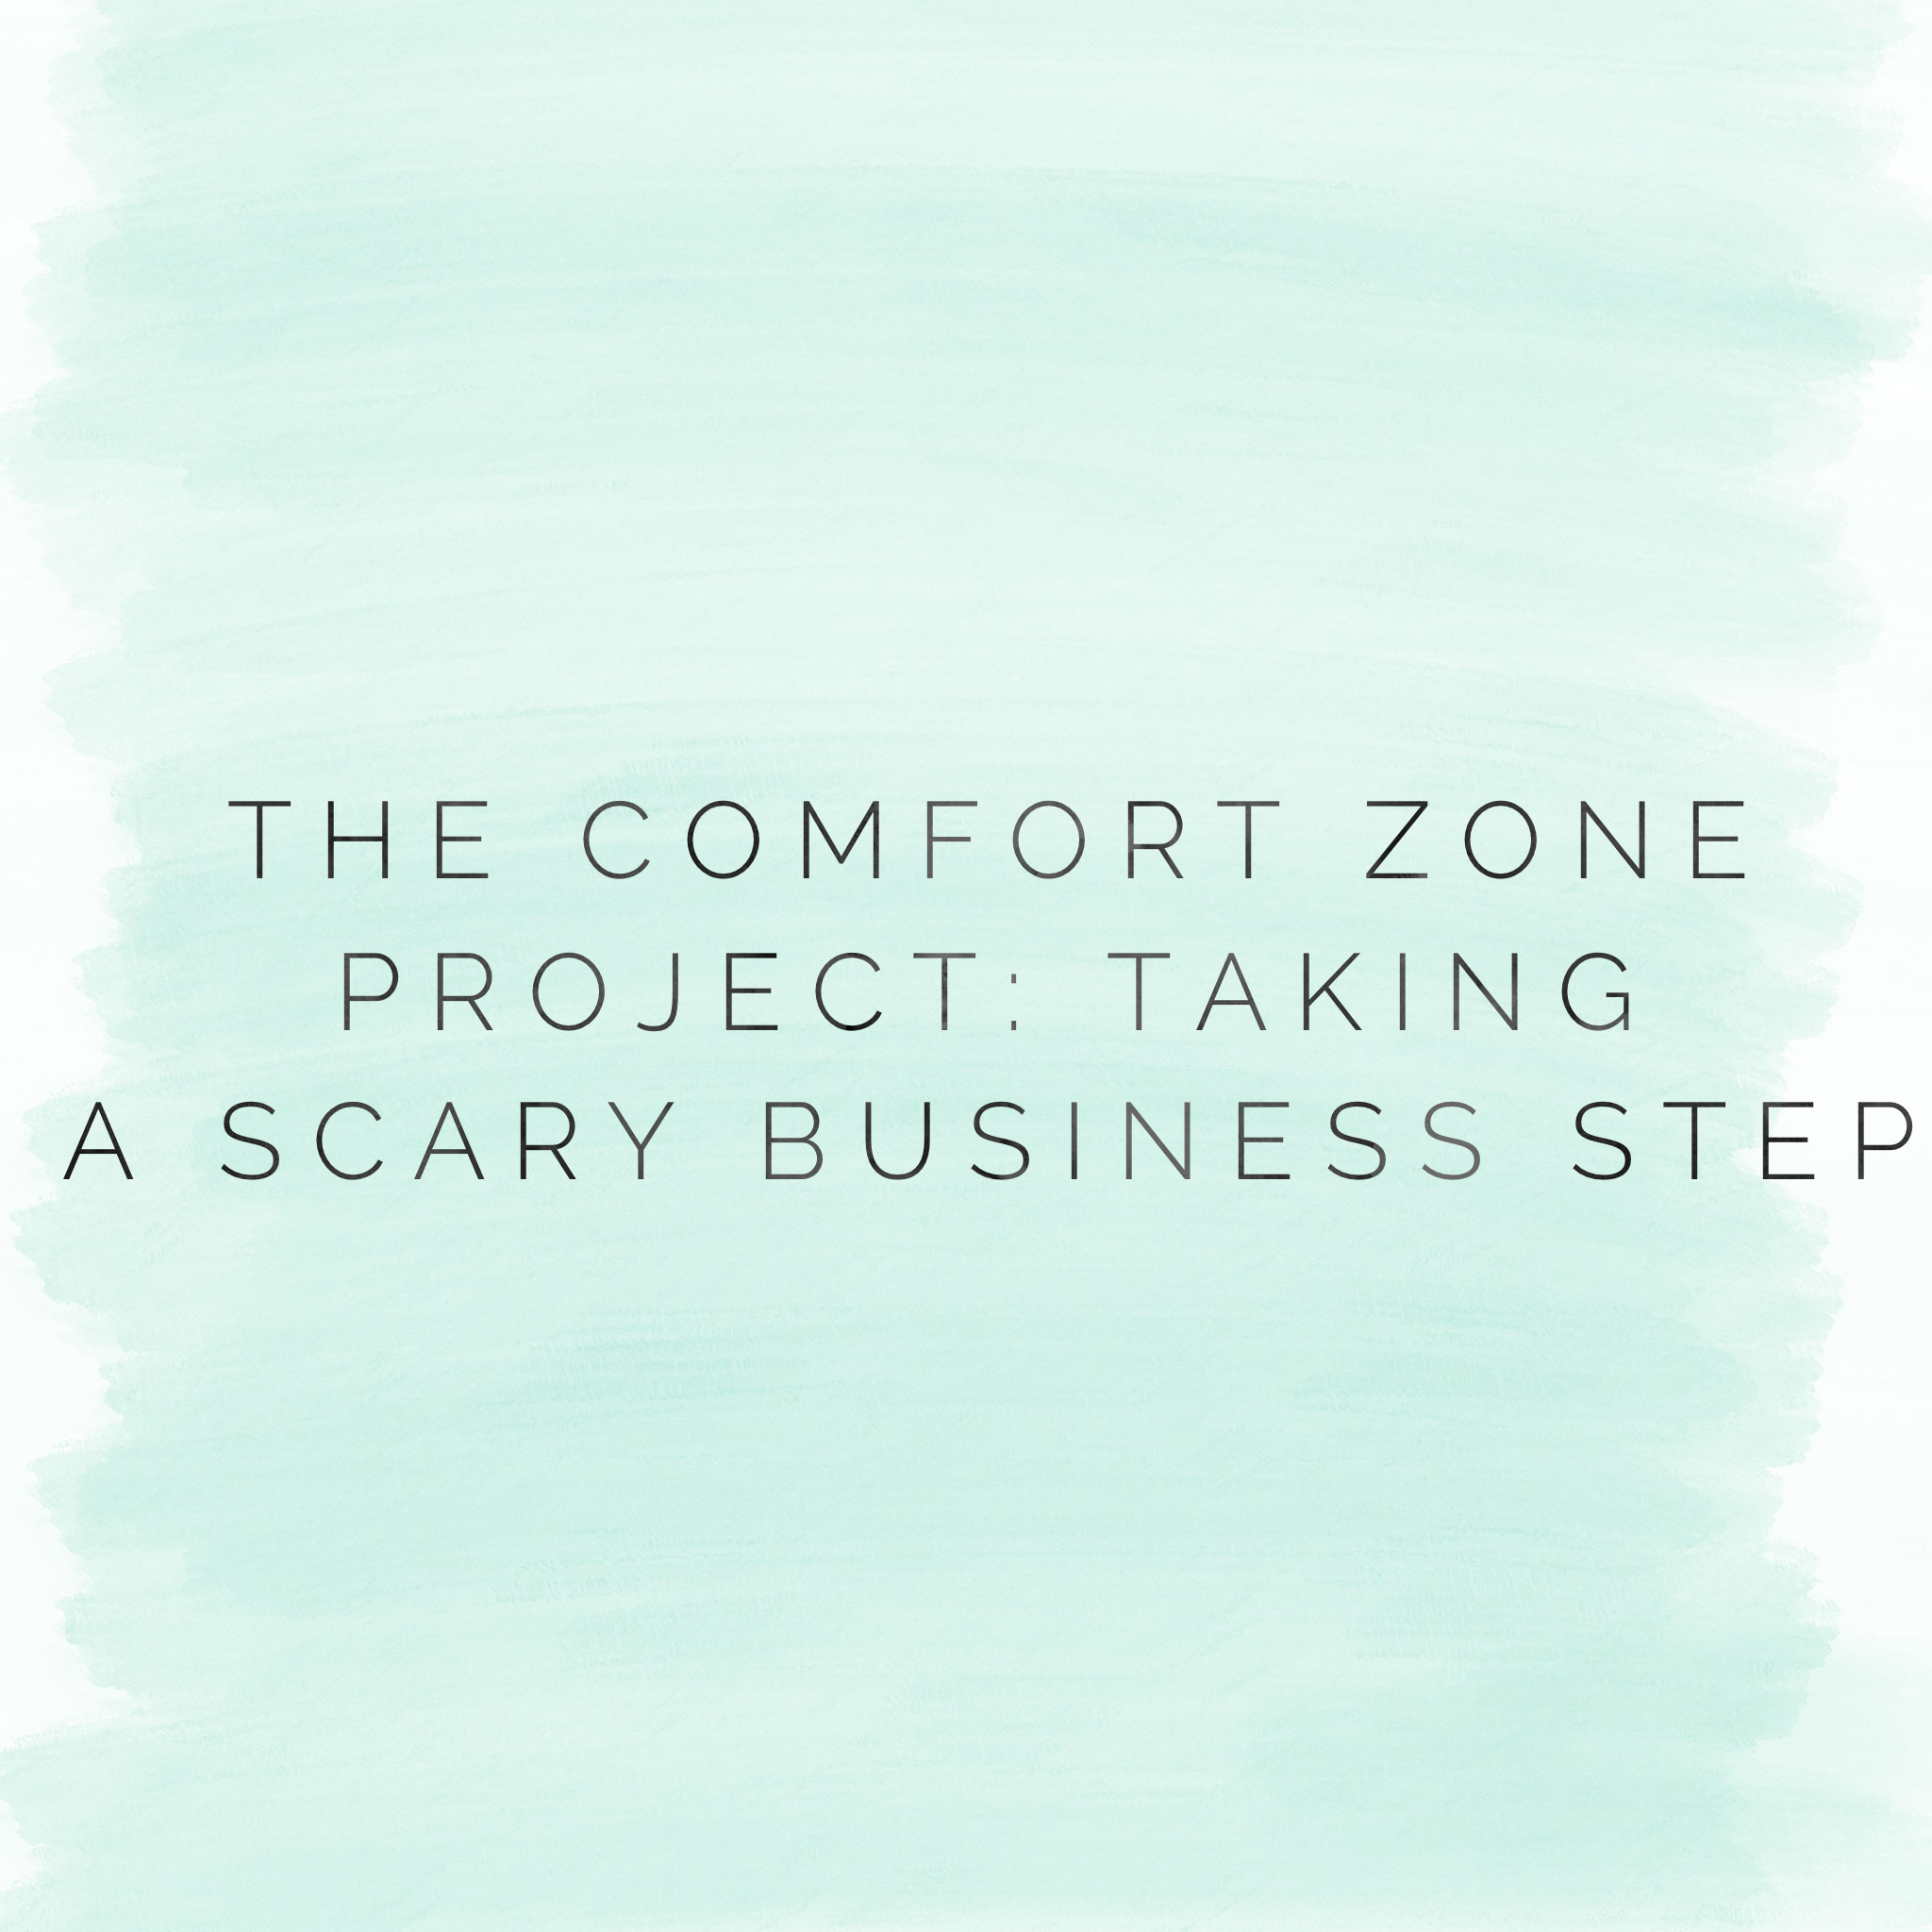 The Comfort Zone Project: Taking a Scary Business Step